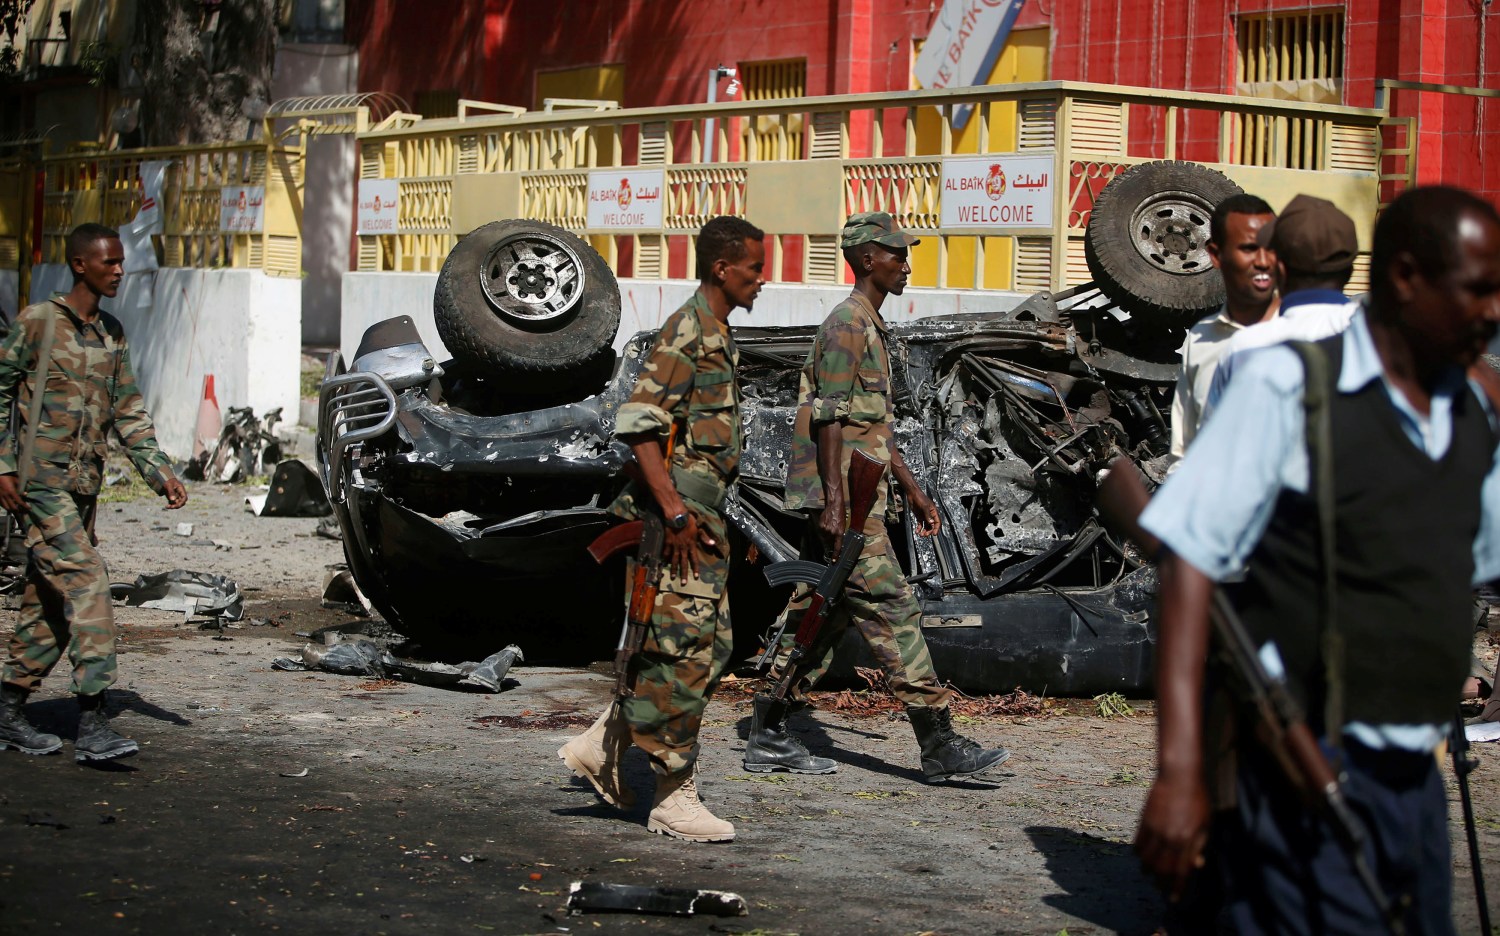 Somali government soldiers secure the scene of an attack on a restaurant by the Somali Islamist group al Shabaab in the capital Mogadishu, Somalia, October 1, 2016. REUTERS/Feisal Omar - S1BEUEMCYWAA